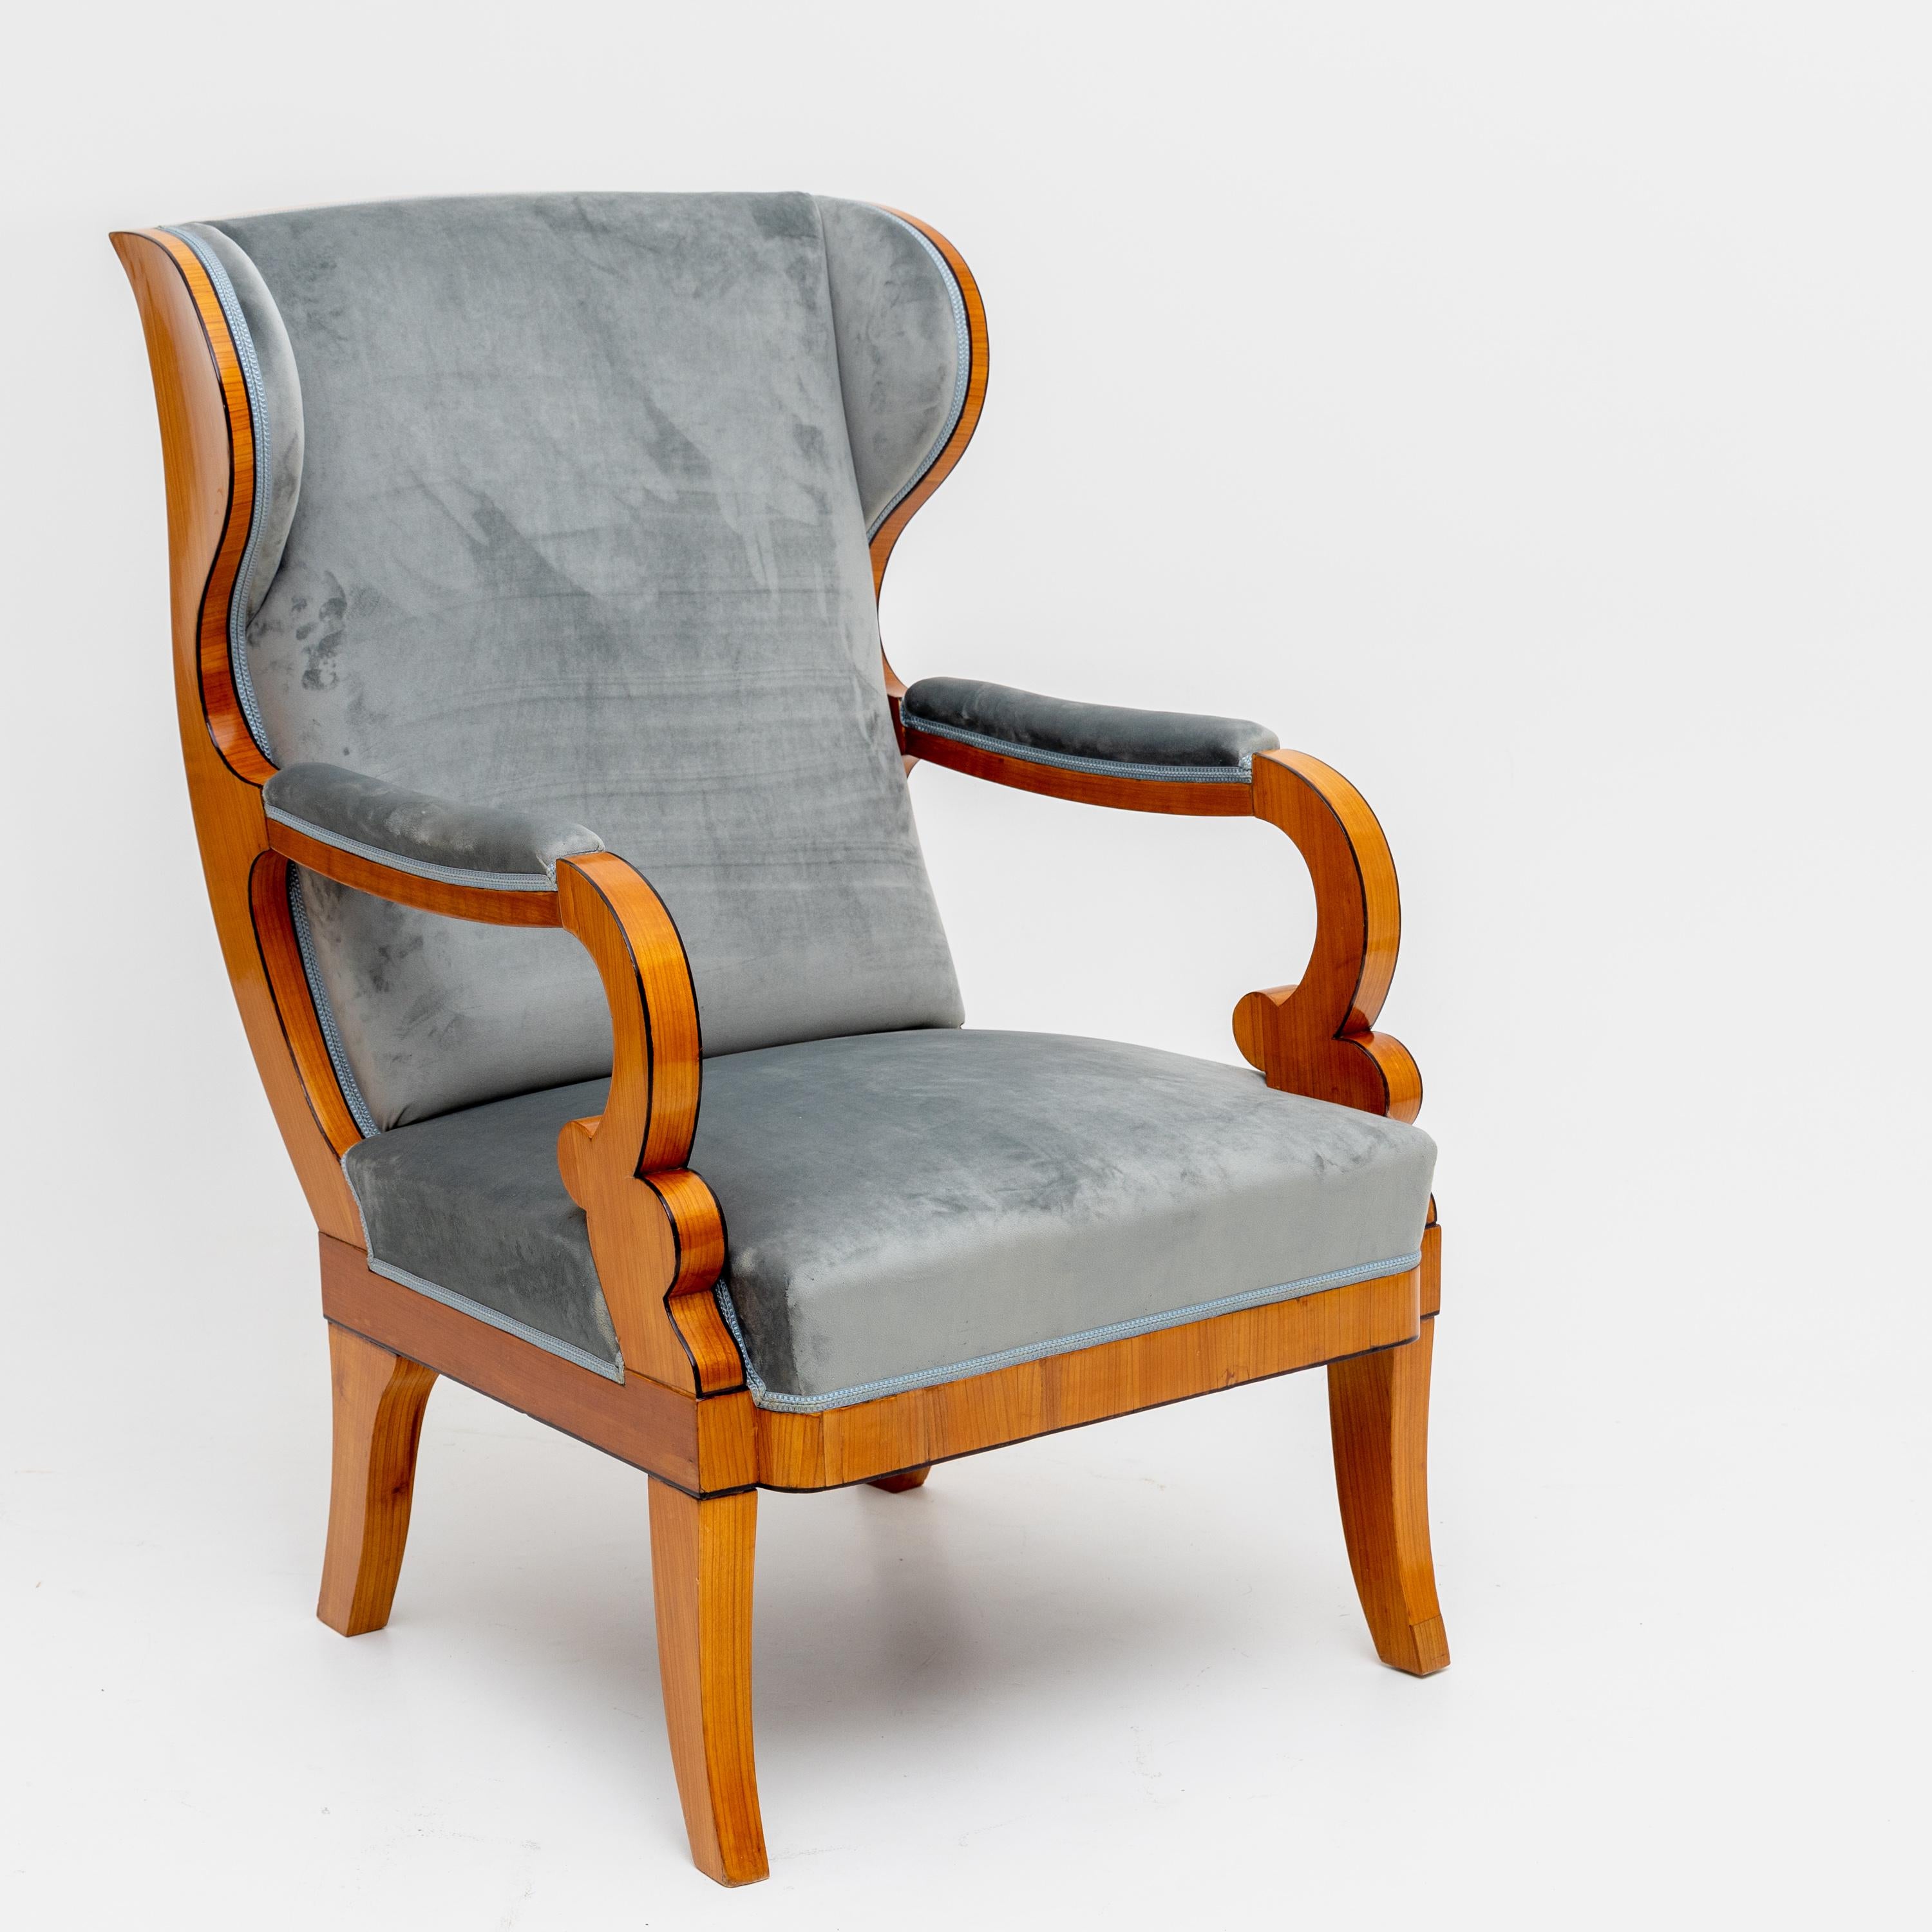 German Pair of Wingback Chairs, c. 1830 For Sale